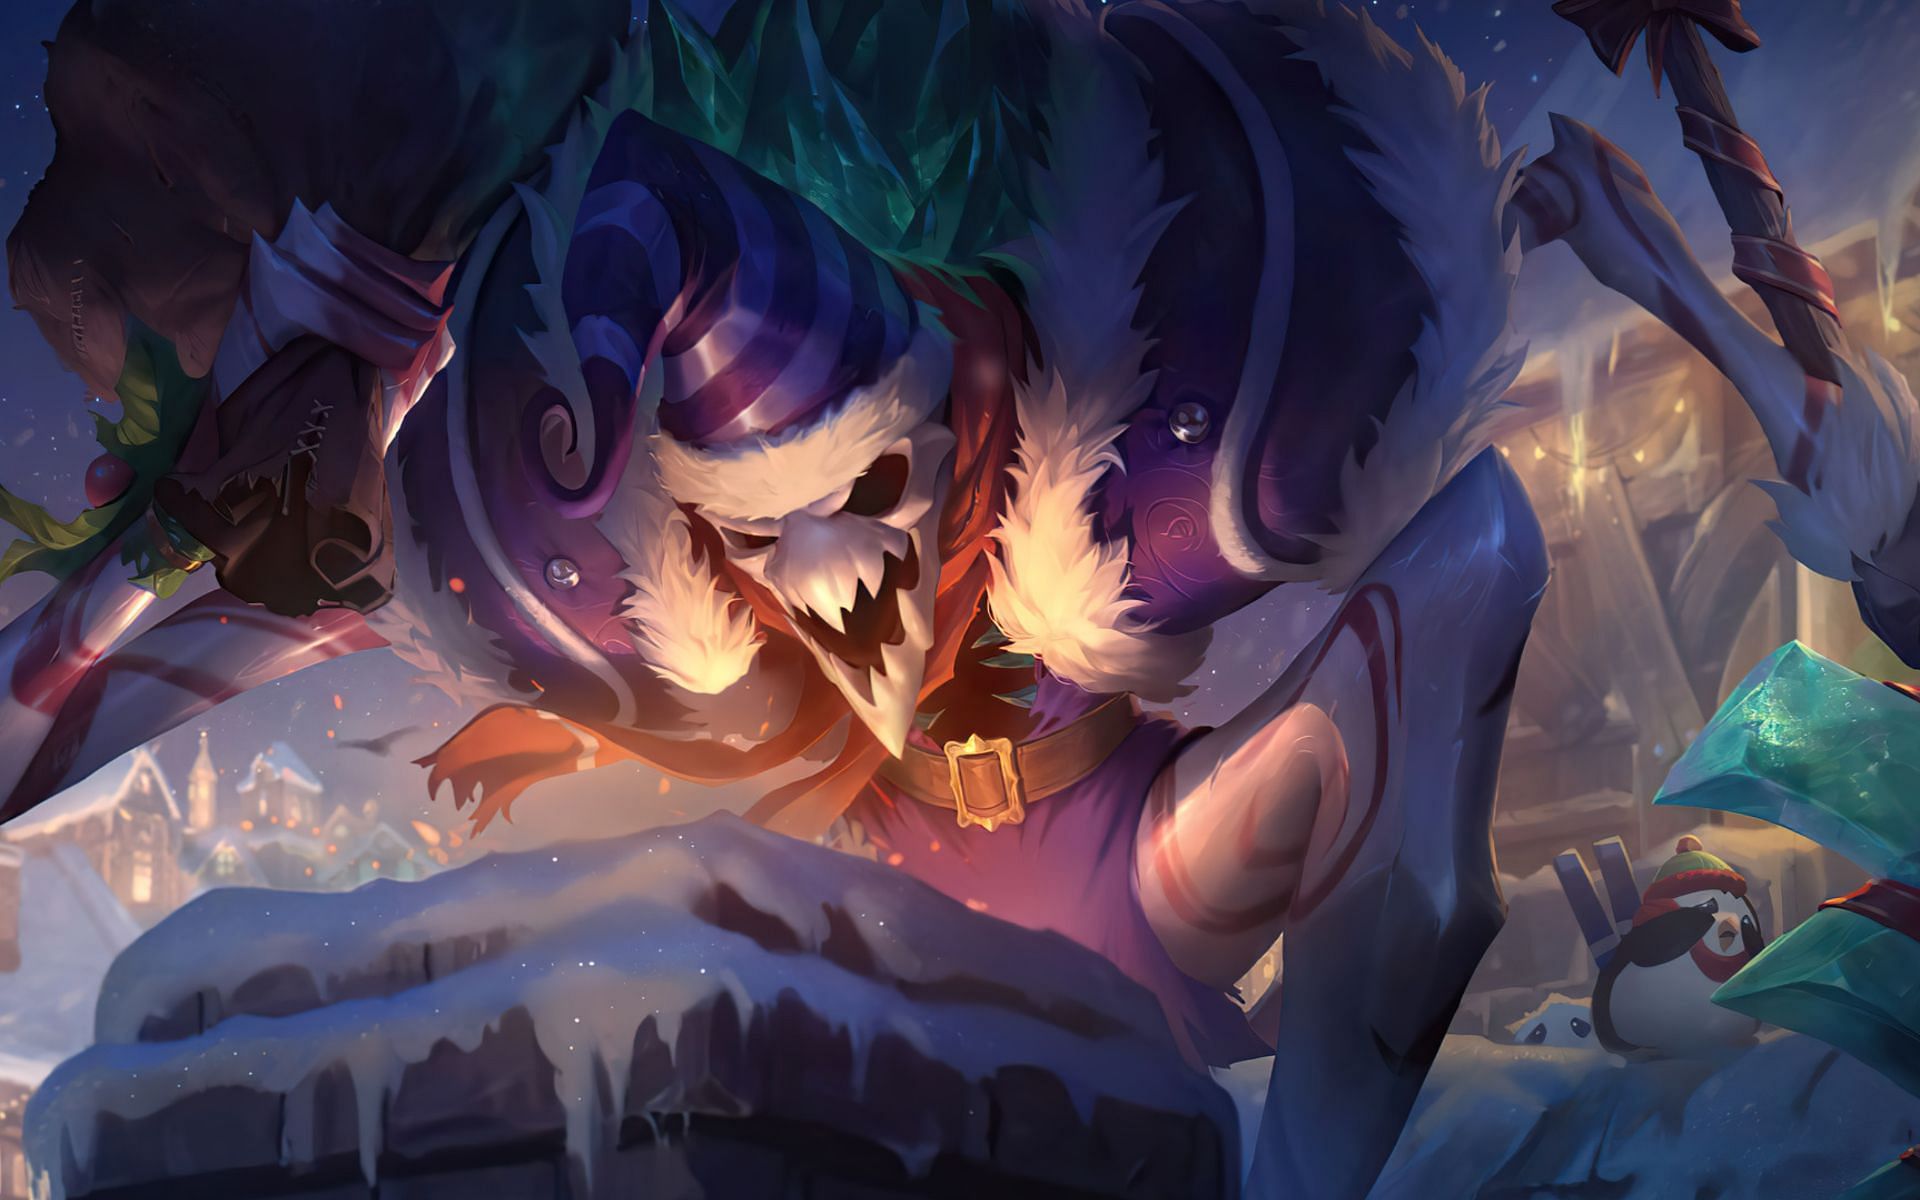 Fiddlesticks is one of the most powerful team-fighting champions in the game (Image via Riot Games)